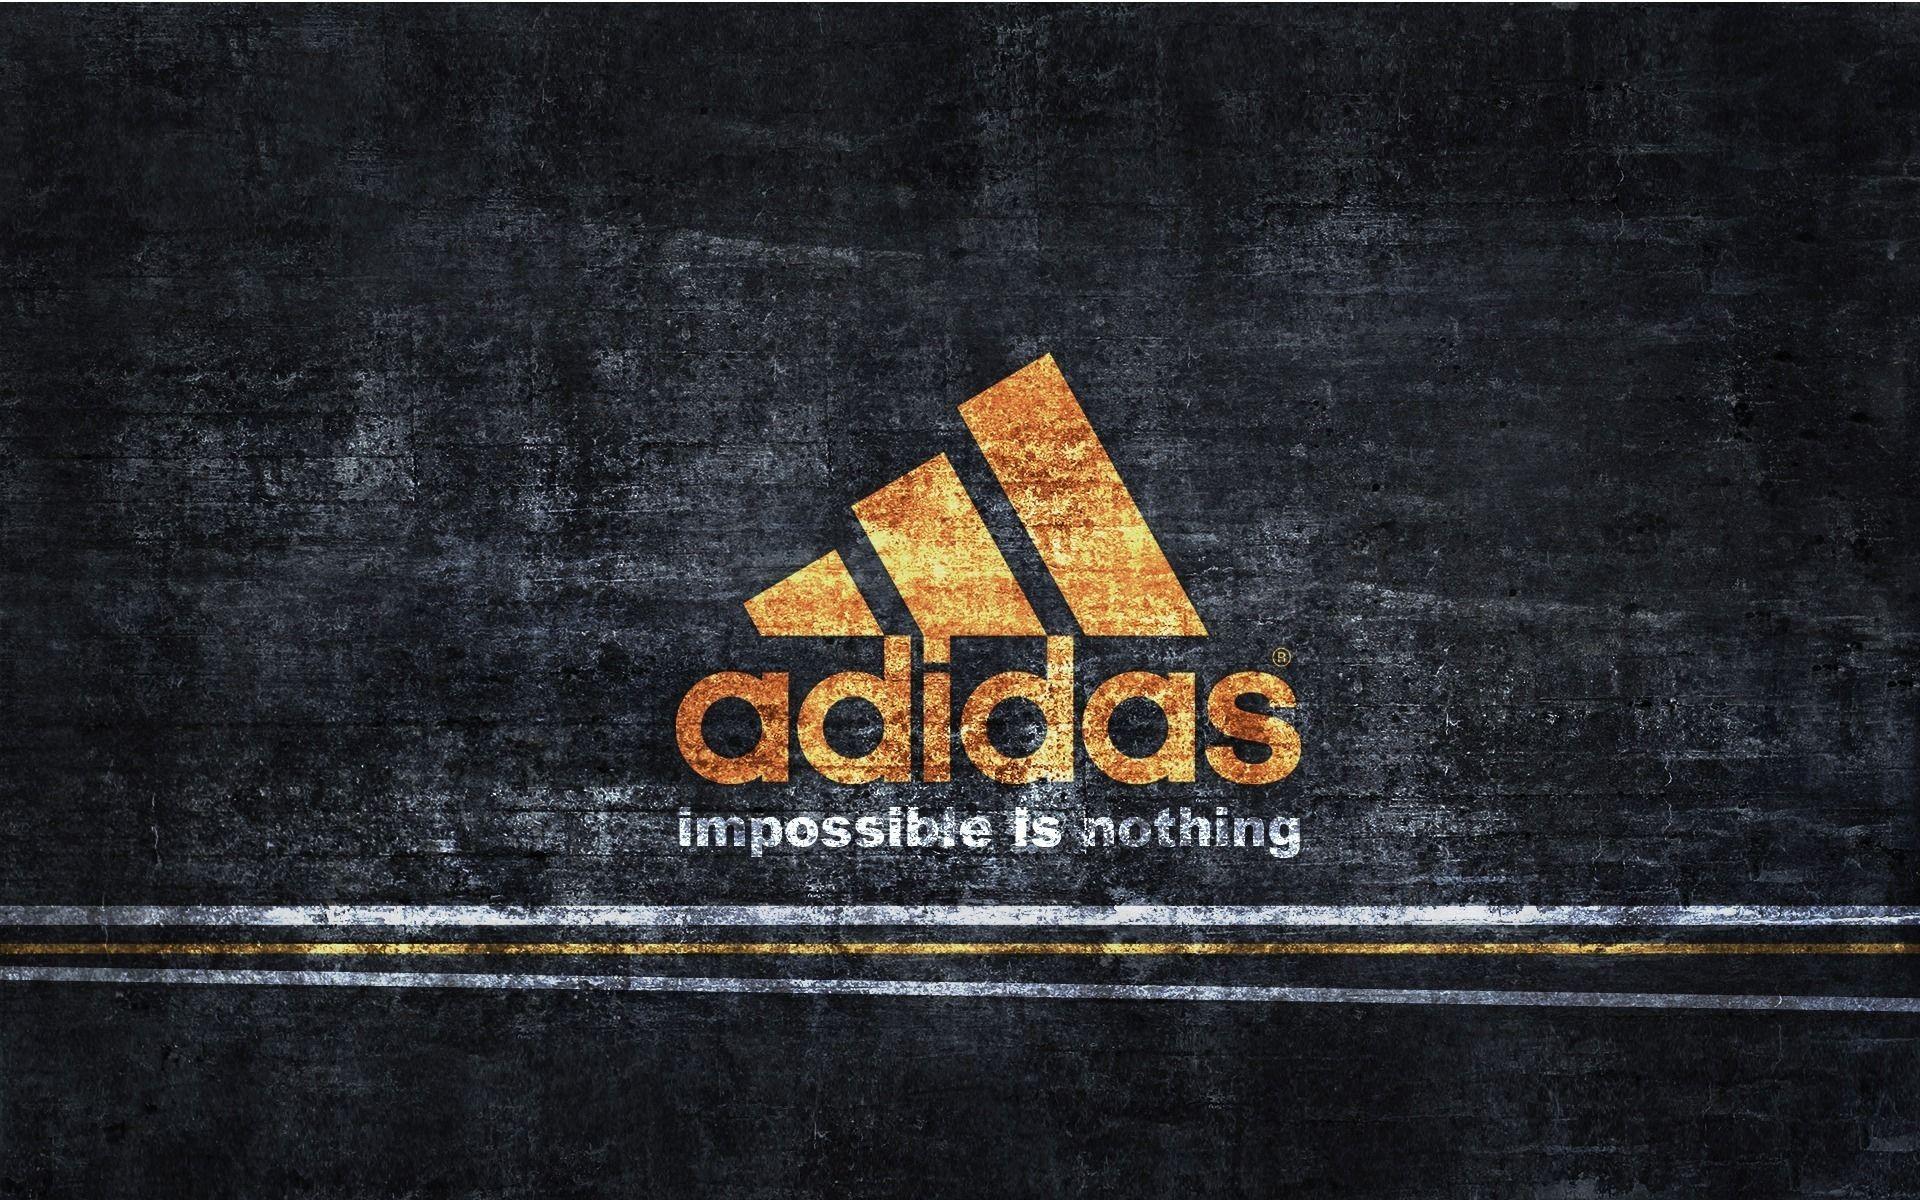 Impossible is NOTHING! Amazing Adidas wallpaper. #adidas